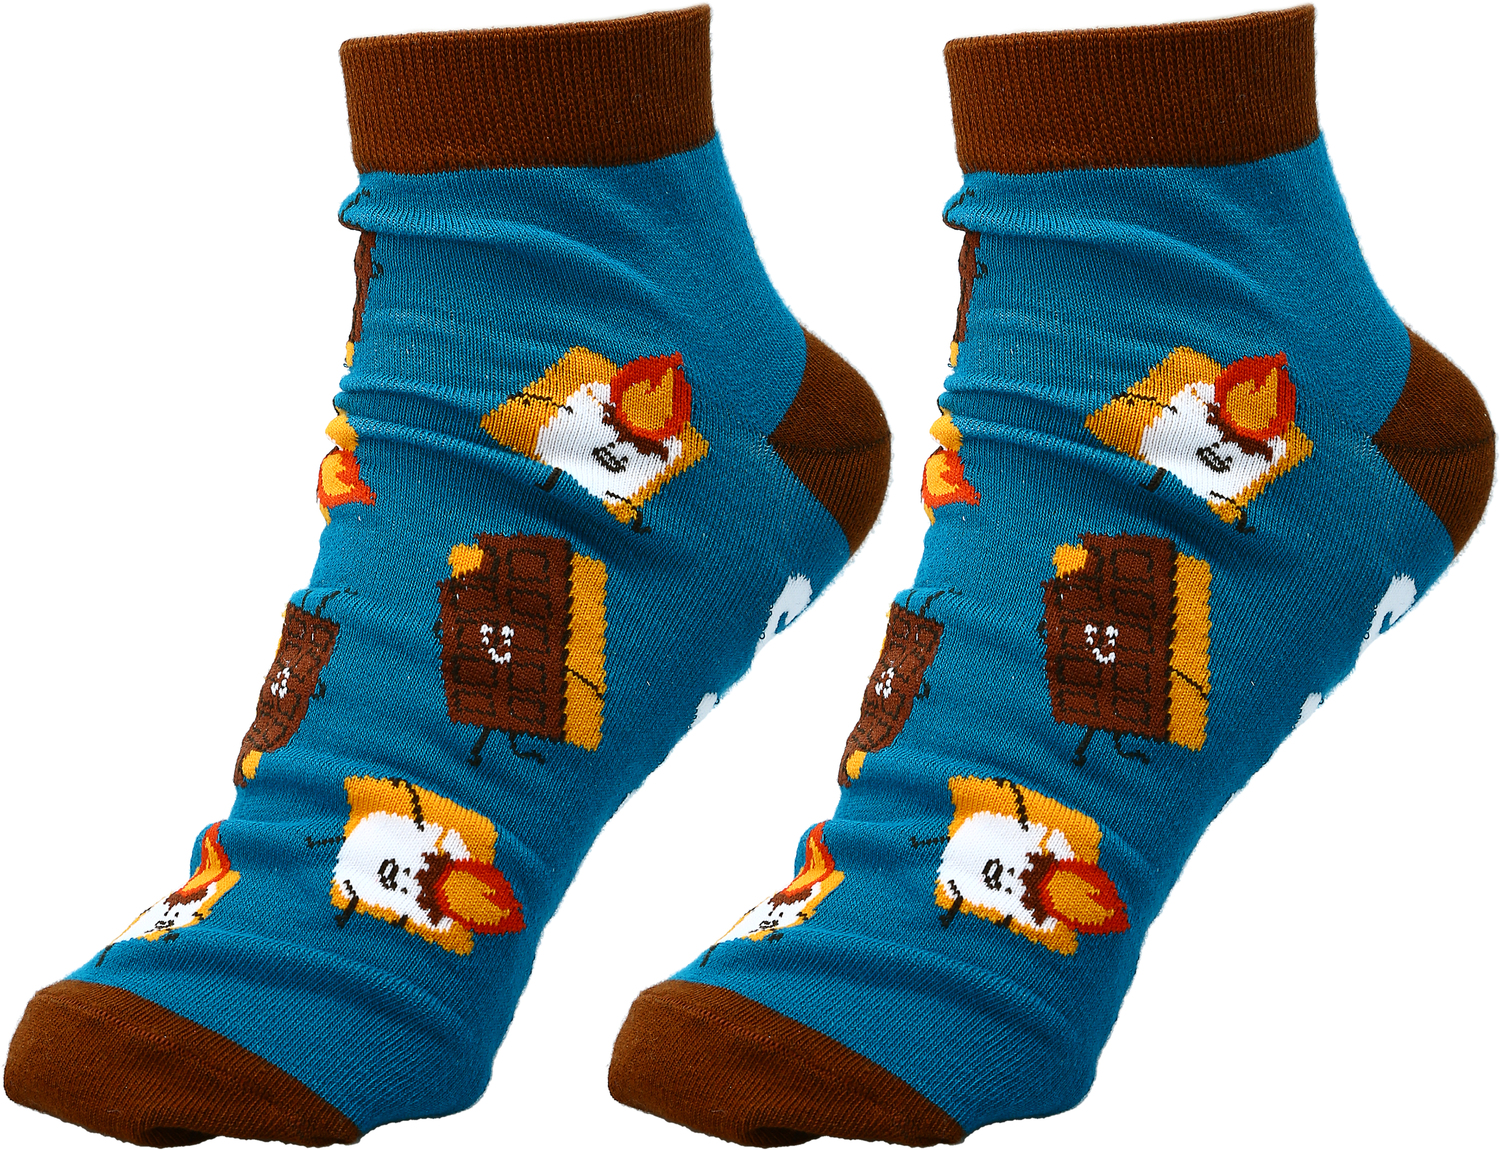 S'mores by Late Night Snacks - S'mores - Cotton Blend Ankle Socks